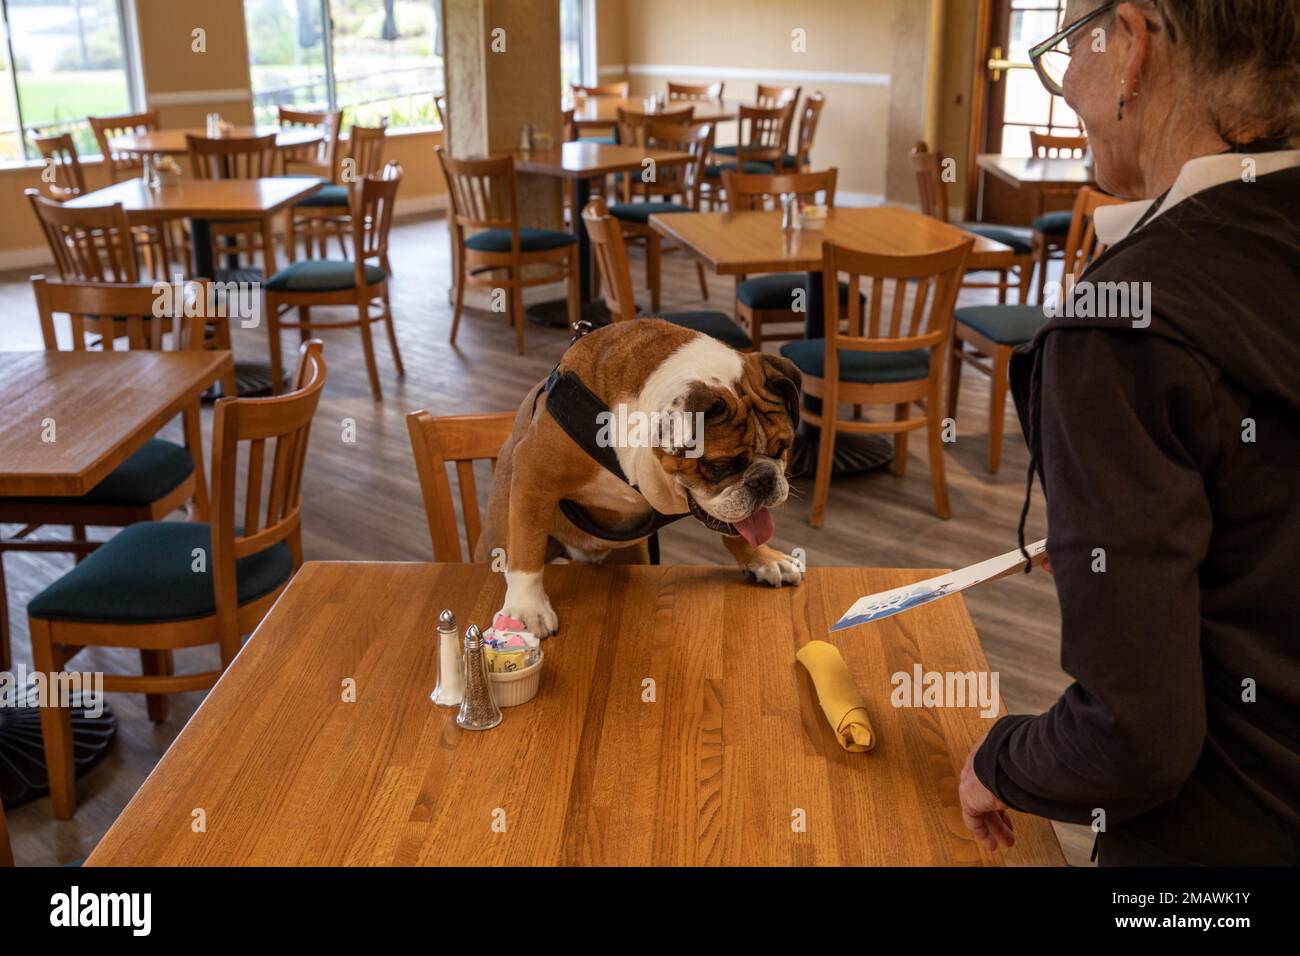 Dawn Crampton, a waiter at The Bay View, hands U.S. Marine Corps Cpl. Manny a menu at Marine Corps Recruit Depot San Diego, June 6, 2022. Manny was named after Sgt. Johnny R. Manuelito, one of the original Navajo Code Talkers. Stock Photo